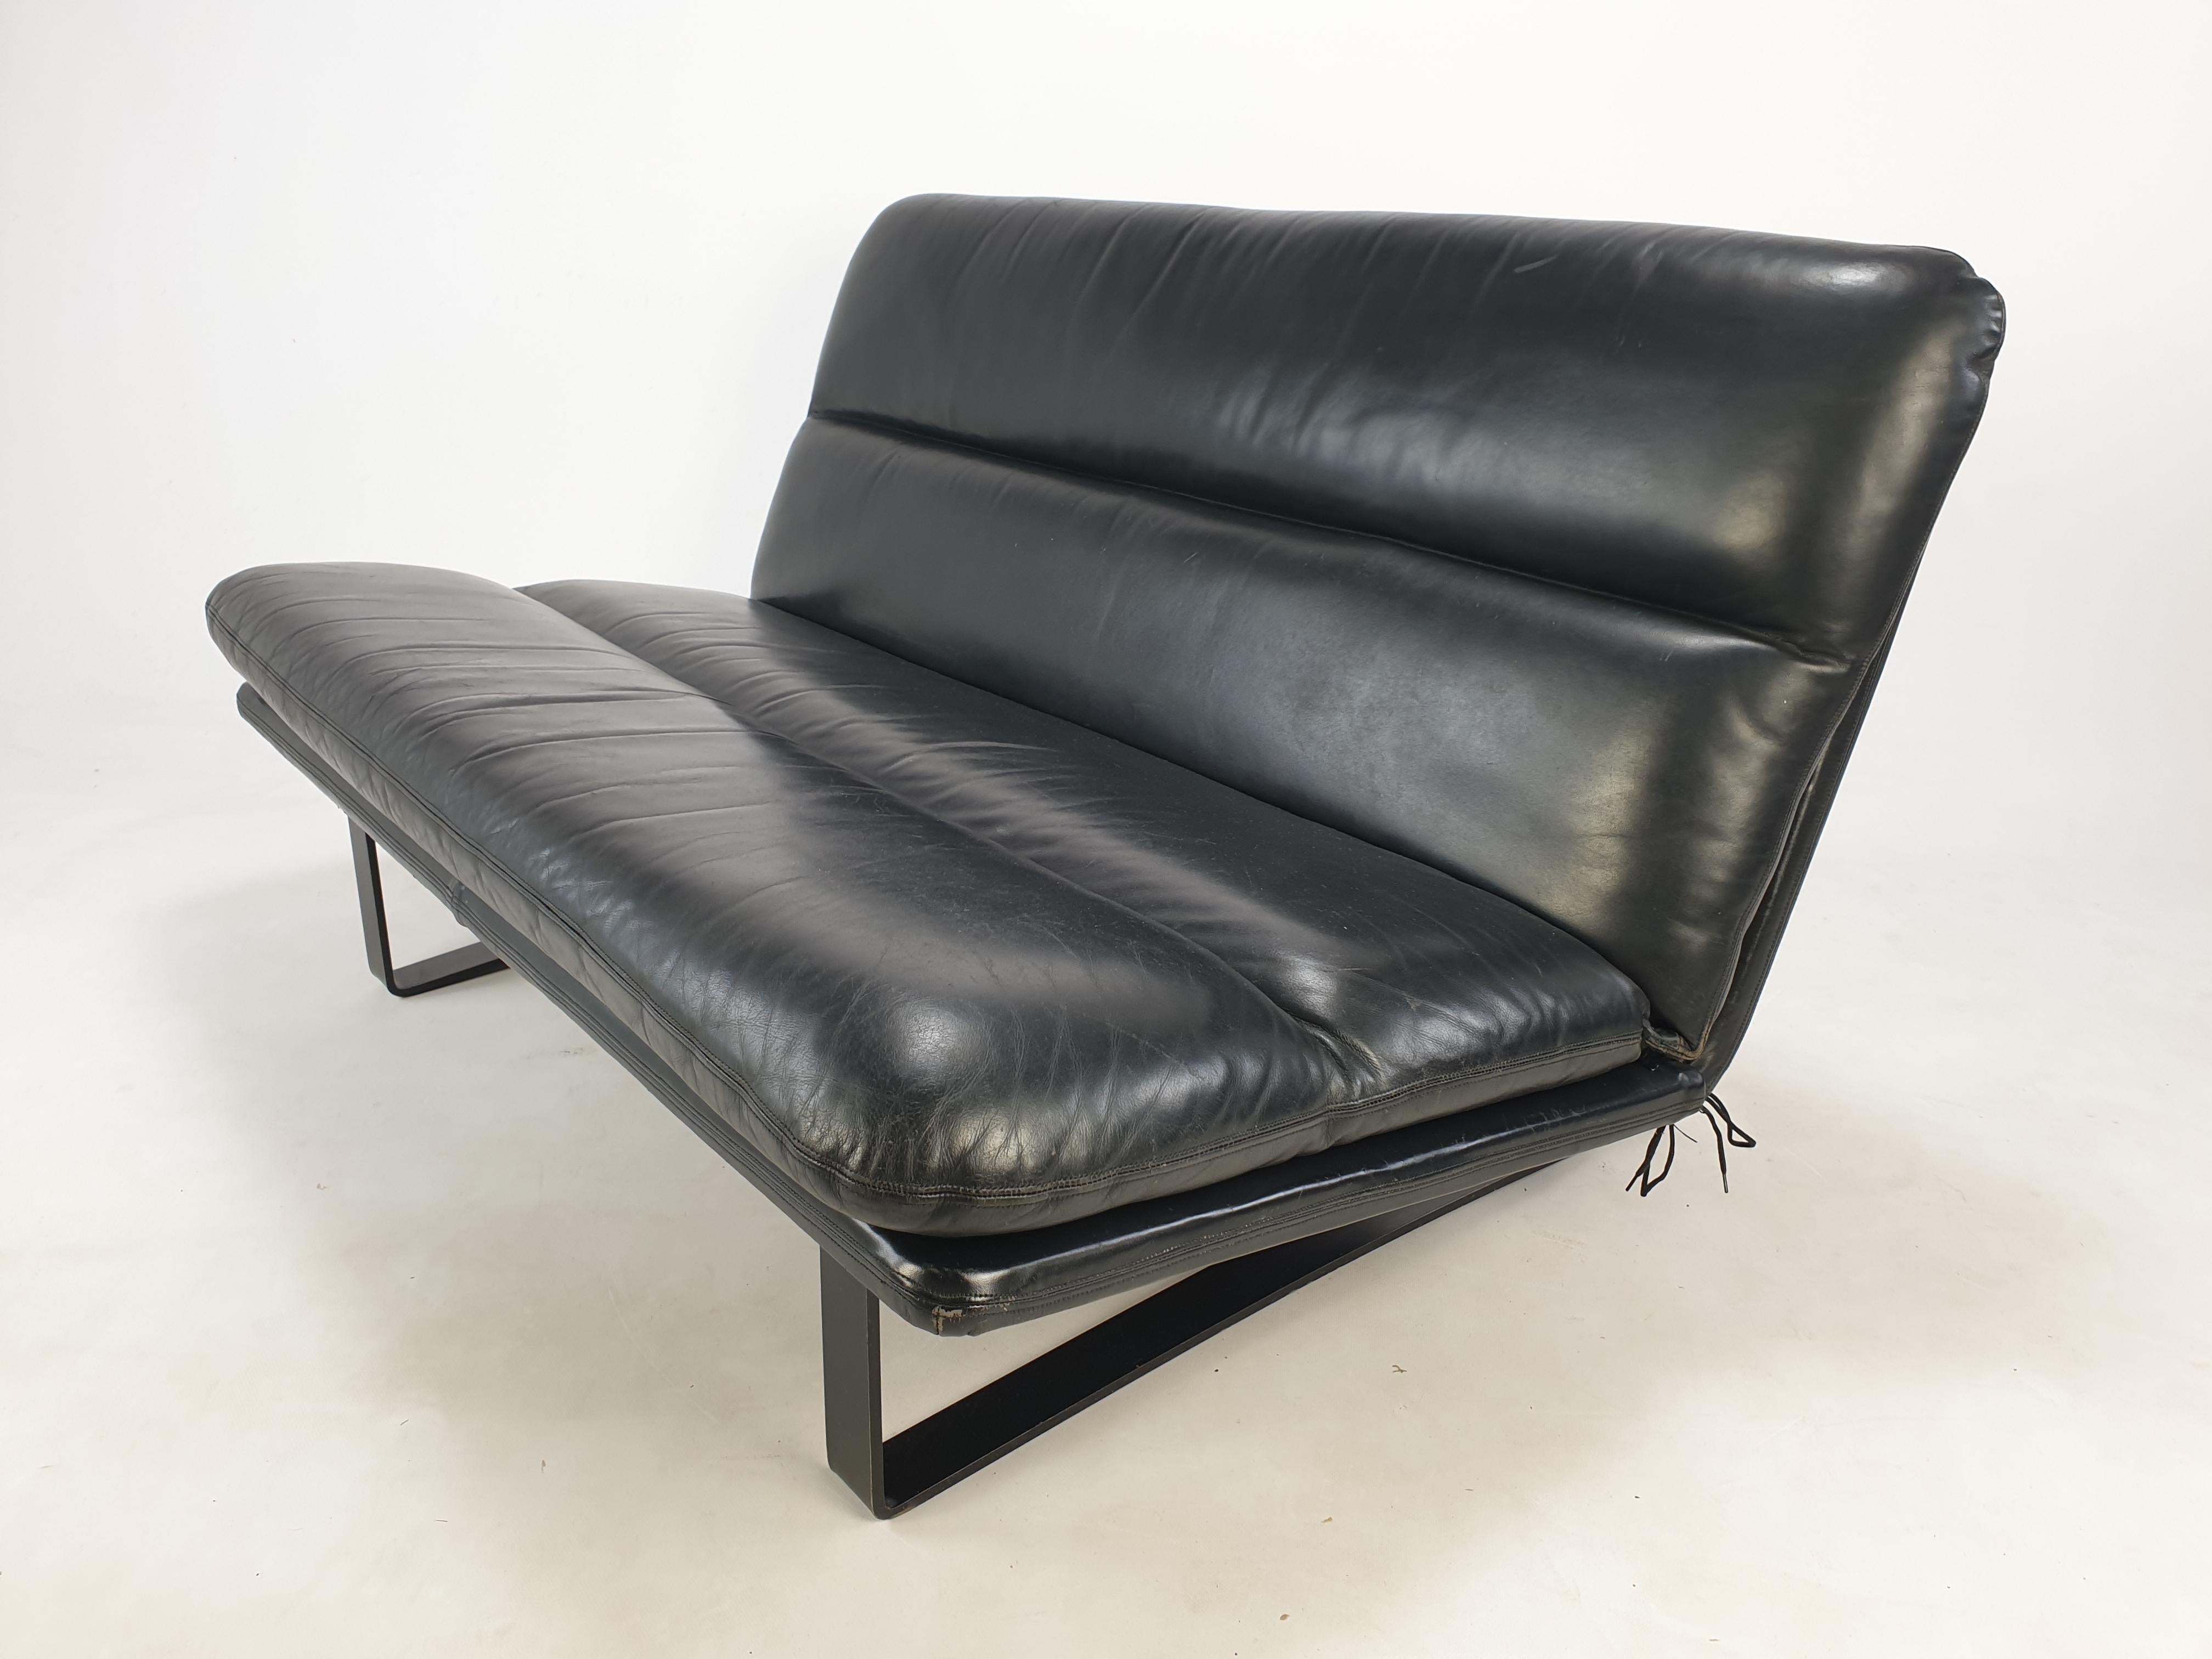 Comfortabele 2-seater sofa designed by Kho Liang Ie.
Manufactured by Artifort in the 60's. In original condition.
Very solid and high quality, made with the best materials.
It has the stunning original black leather, in good used condition with a